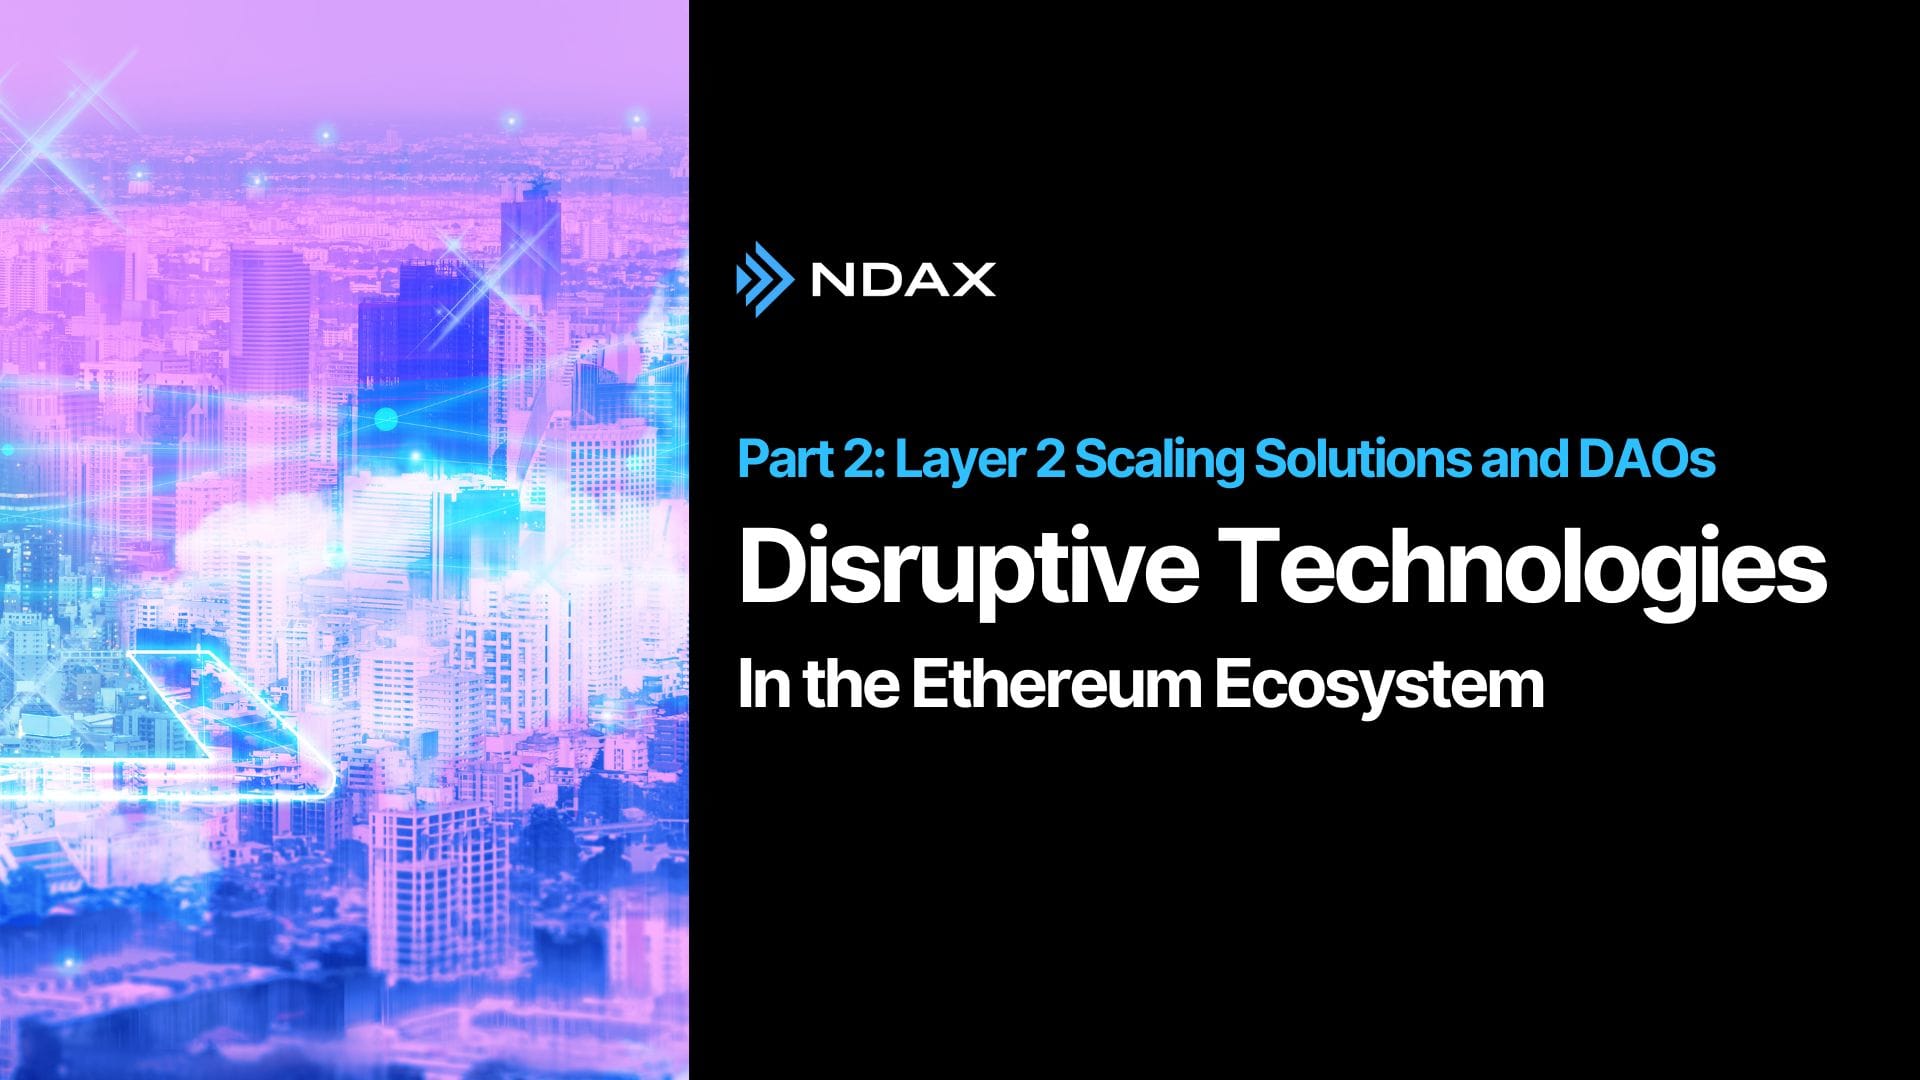 The Most Disruptive Technologies in the Ethereum Ecosystem - Part 2